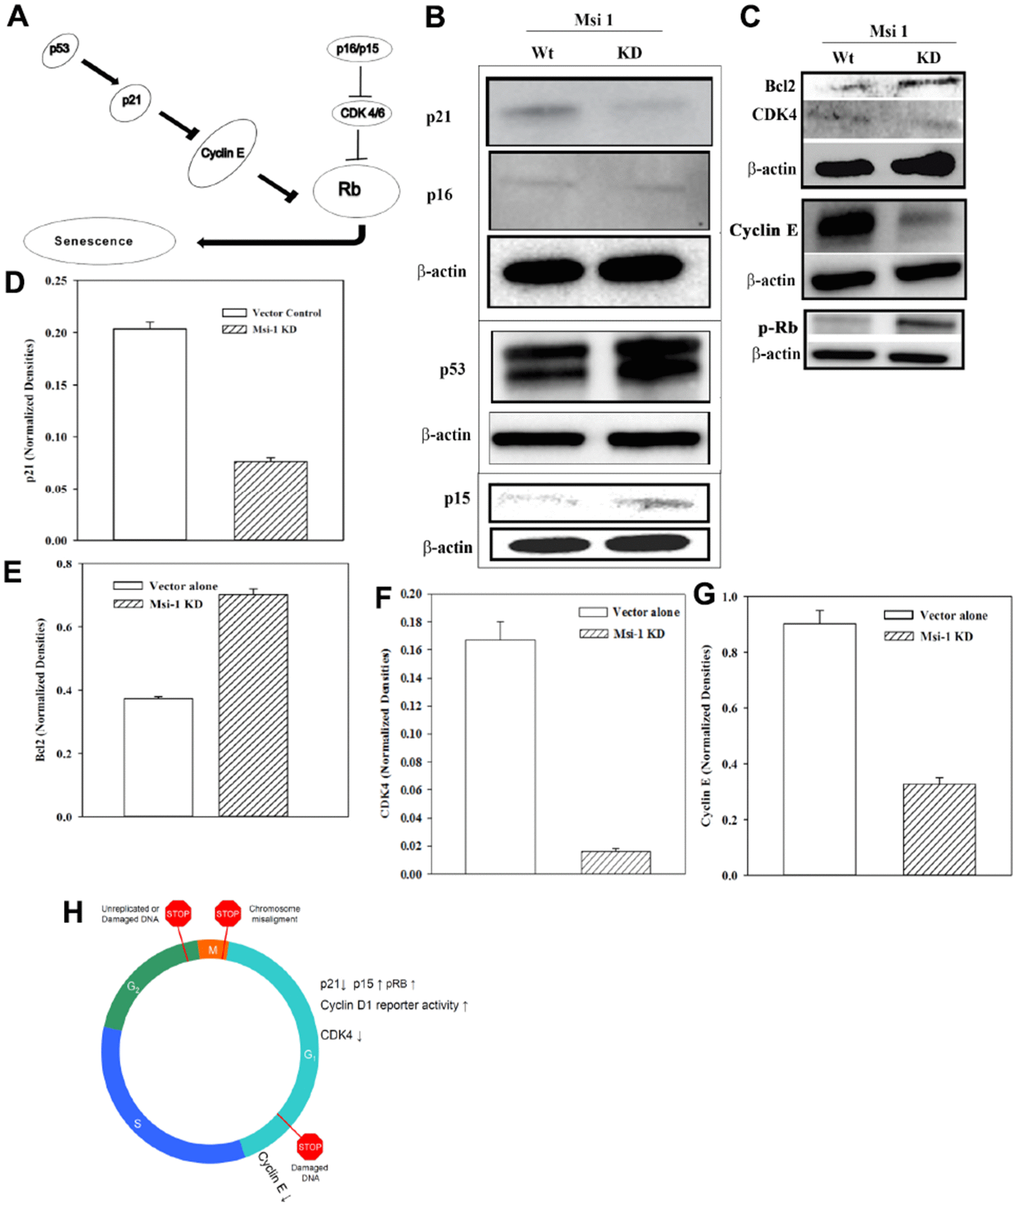 Cell cycle-associated gene levels in Msi 1 knockdown BCCs. (A) Shown is the pathway tested by Western blots. (B) Western blots were performed with whole cell extracts for p21, p16 in the same blot and separate blots for p15 and p53. (C) Western blots were performed for Bcl2 and CDK4 in the same blot and separate blots for Cyclin E and p-Rb. Each membrane was stripped and reprobed for β-actin. The blots represent the mean±SD of three independent experiments. (D–G) Normalized bands are shown for key proteins in the Western blots, ±SD, n=3. (H) A summary of the cycling protein levels relative to the cycling phase.